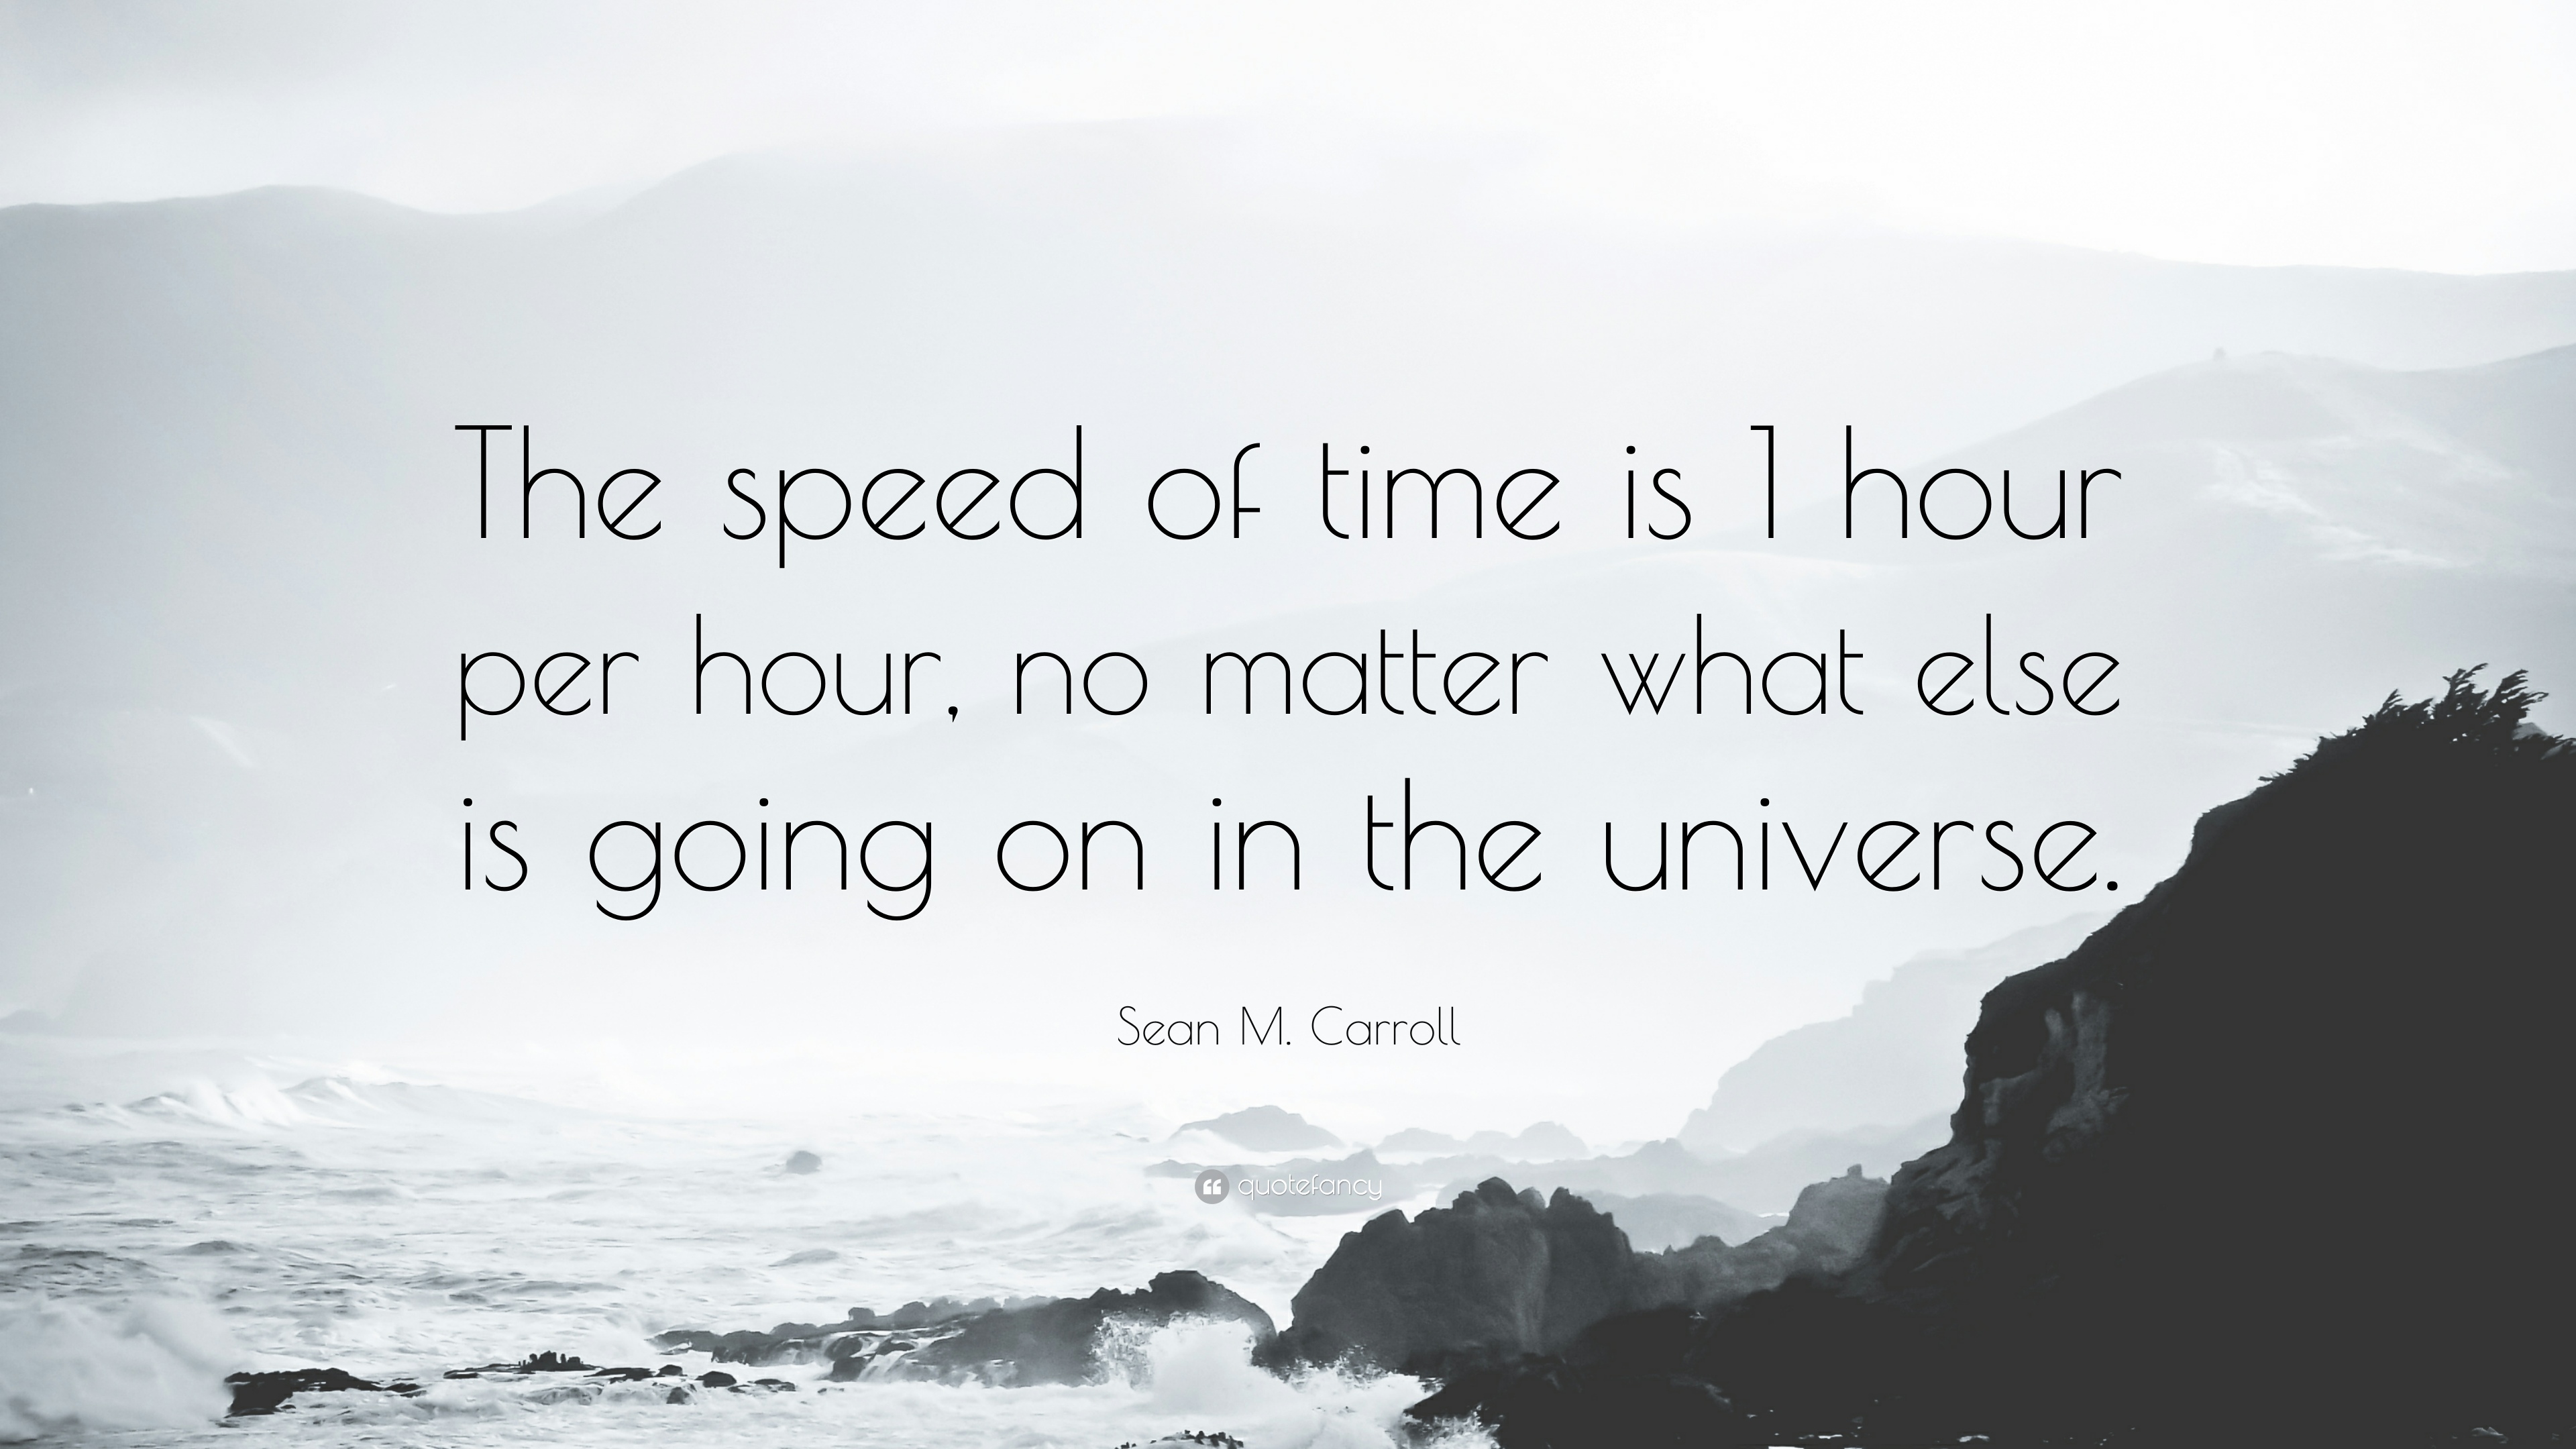 Sean M. Carroll Quote: “The speed of time is 1 hour per hour, no ...